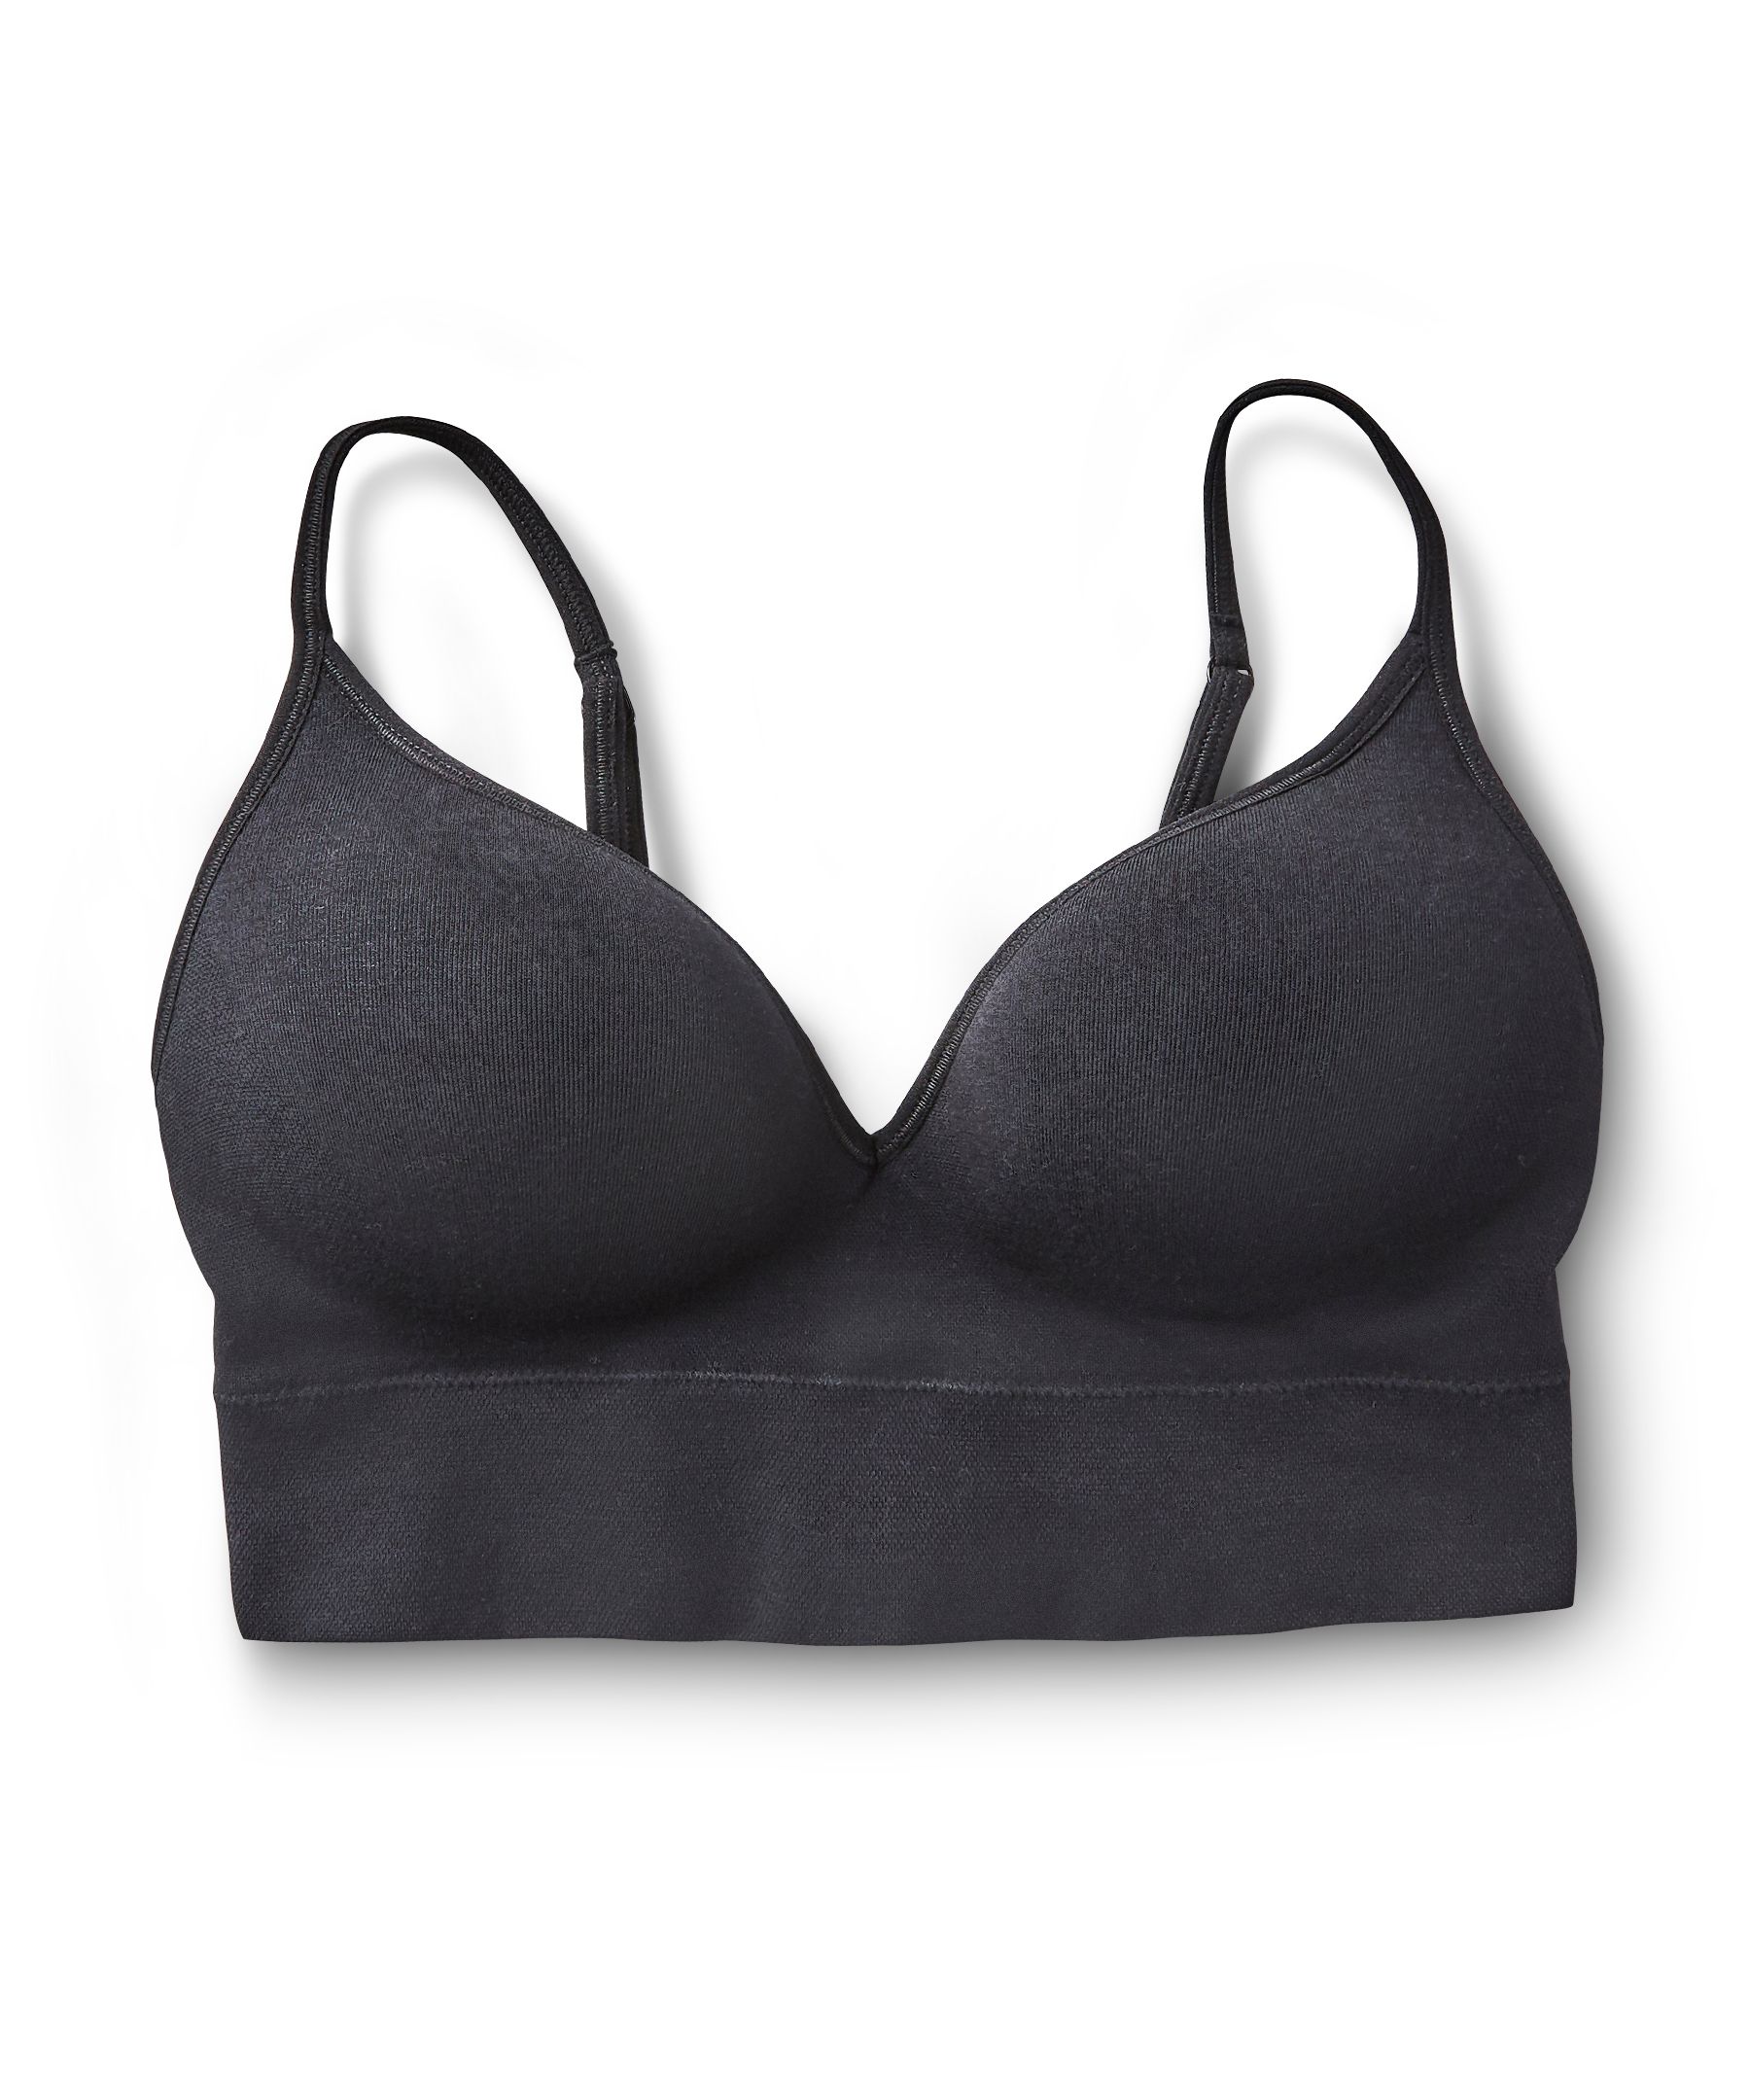 Denver Hayes Women's Perfect Fit Seamless Wire Free Molded Bralette